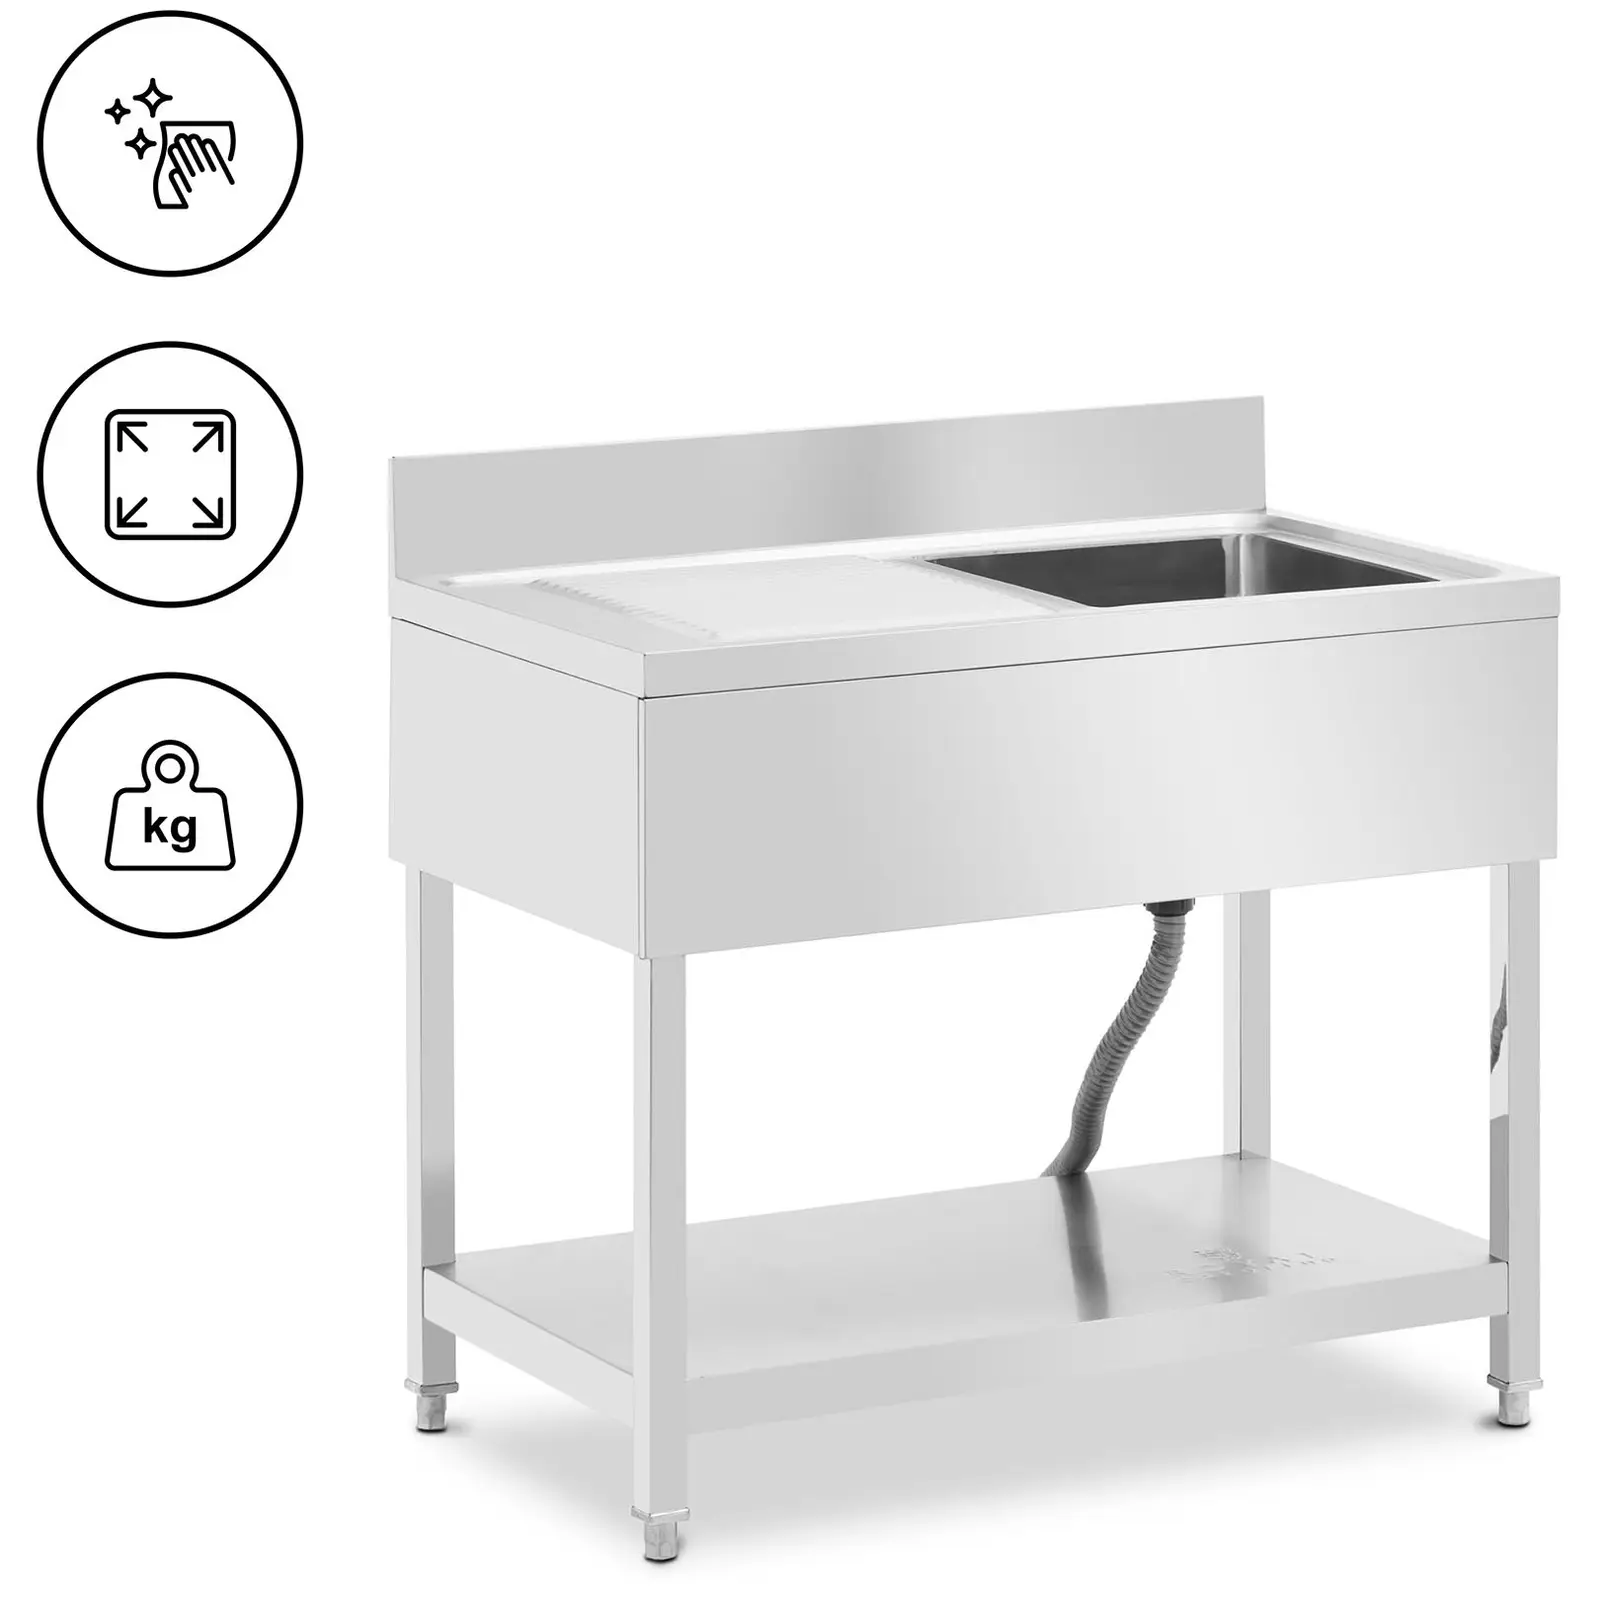 Sink Unit - 1 basin - stainless steel - 180 x 60 x 97 cm - Royal Catering